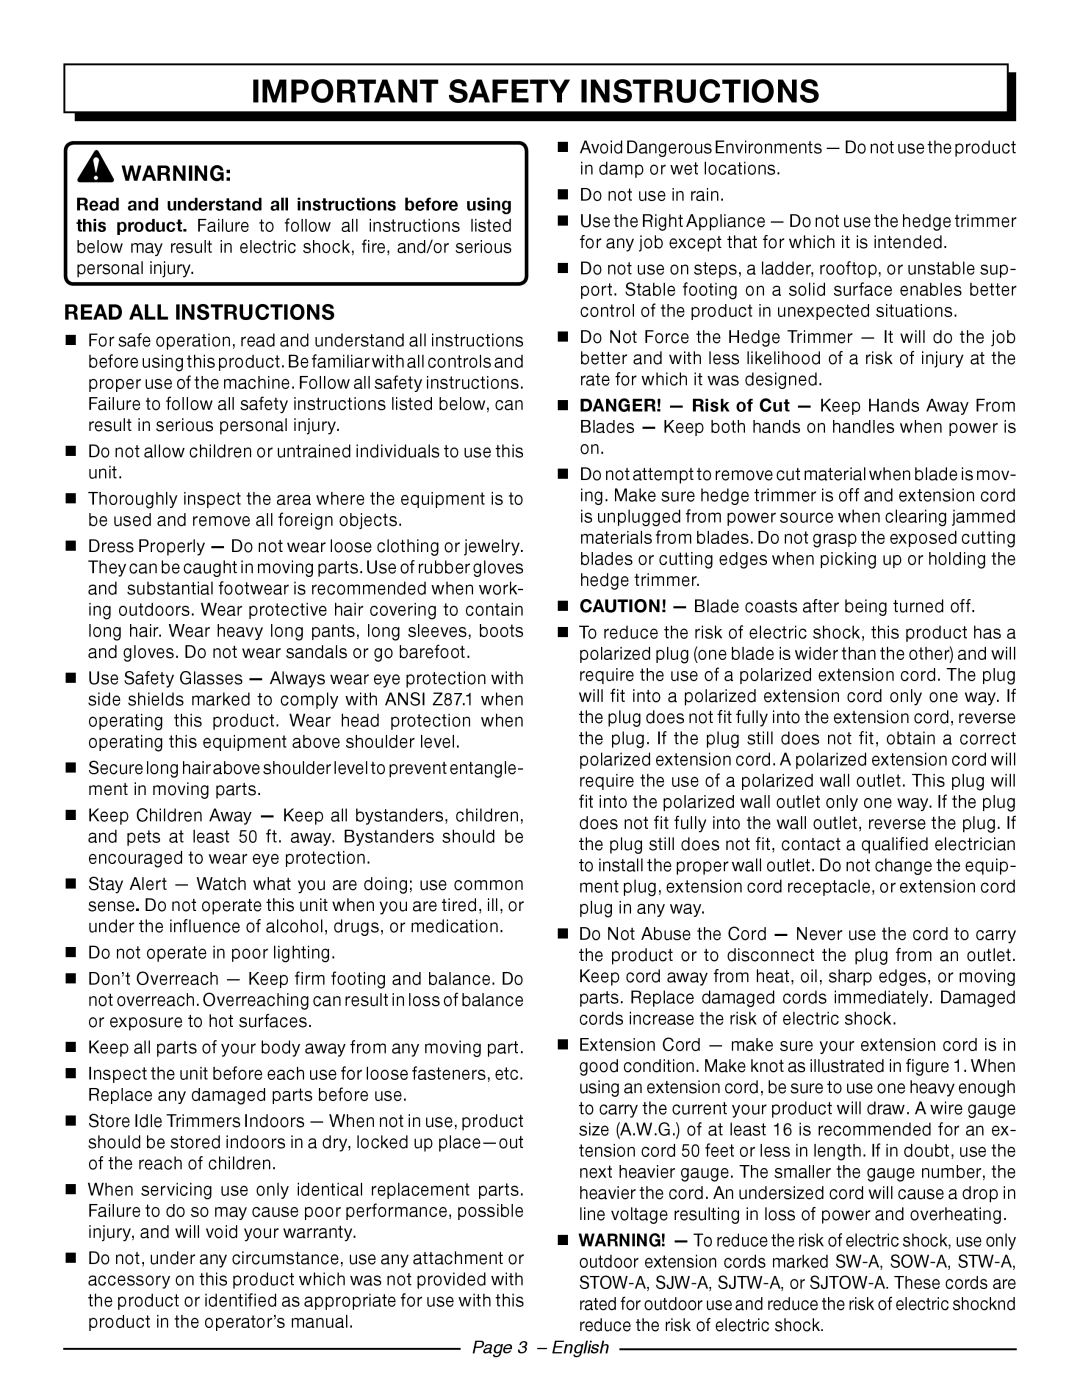 Homelite UT44121 manuel dutilisation Important Safety Instructions, Read All Instructions, Page 3 - English 